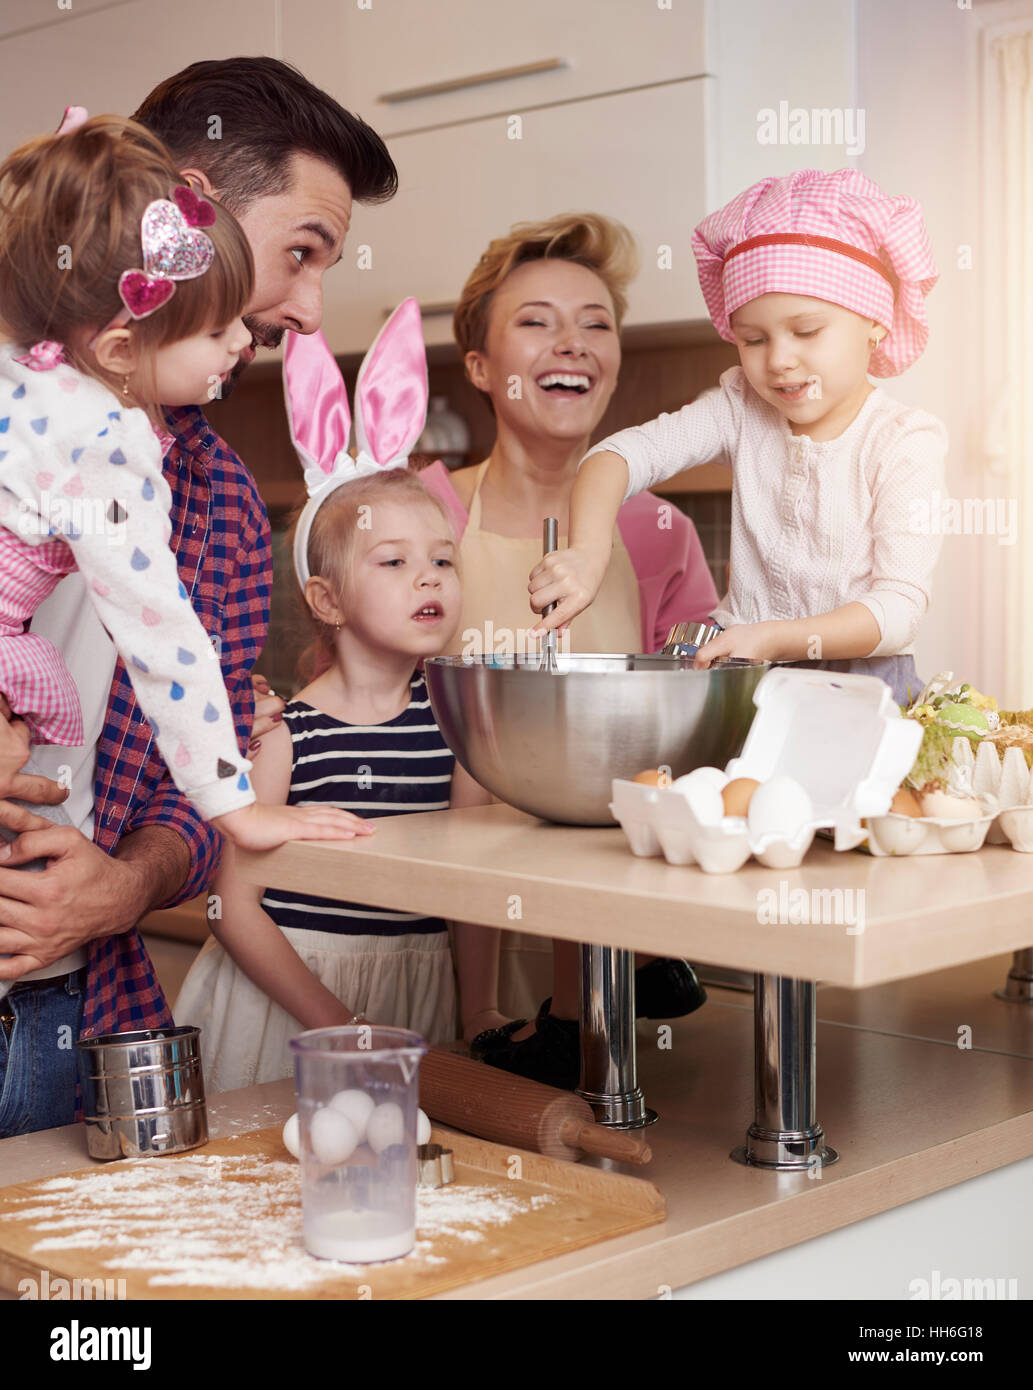 Cheerful family spending time in the kitchen Stock Photo